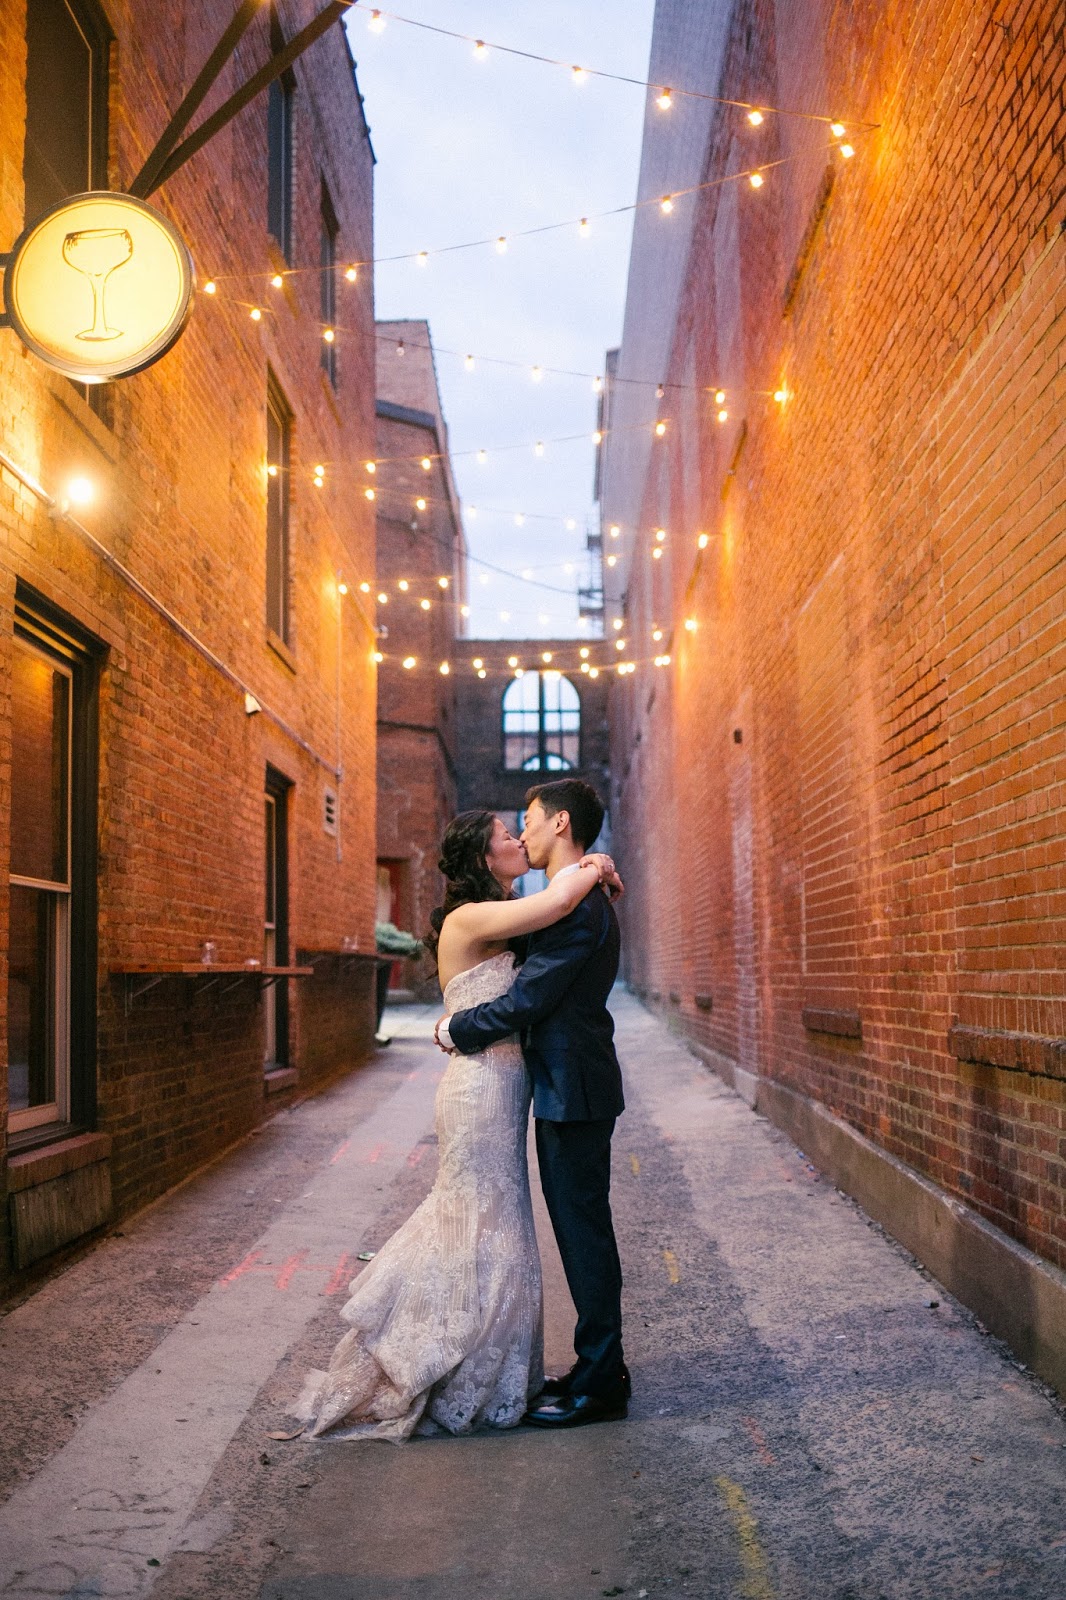 Man and Wife kissing in the street under pretty lights